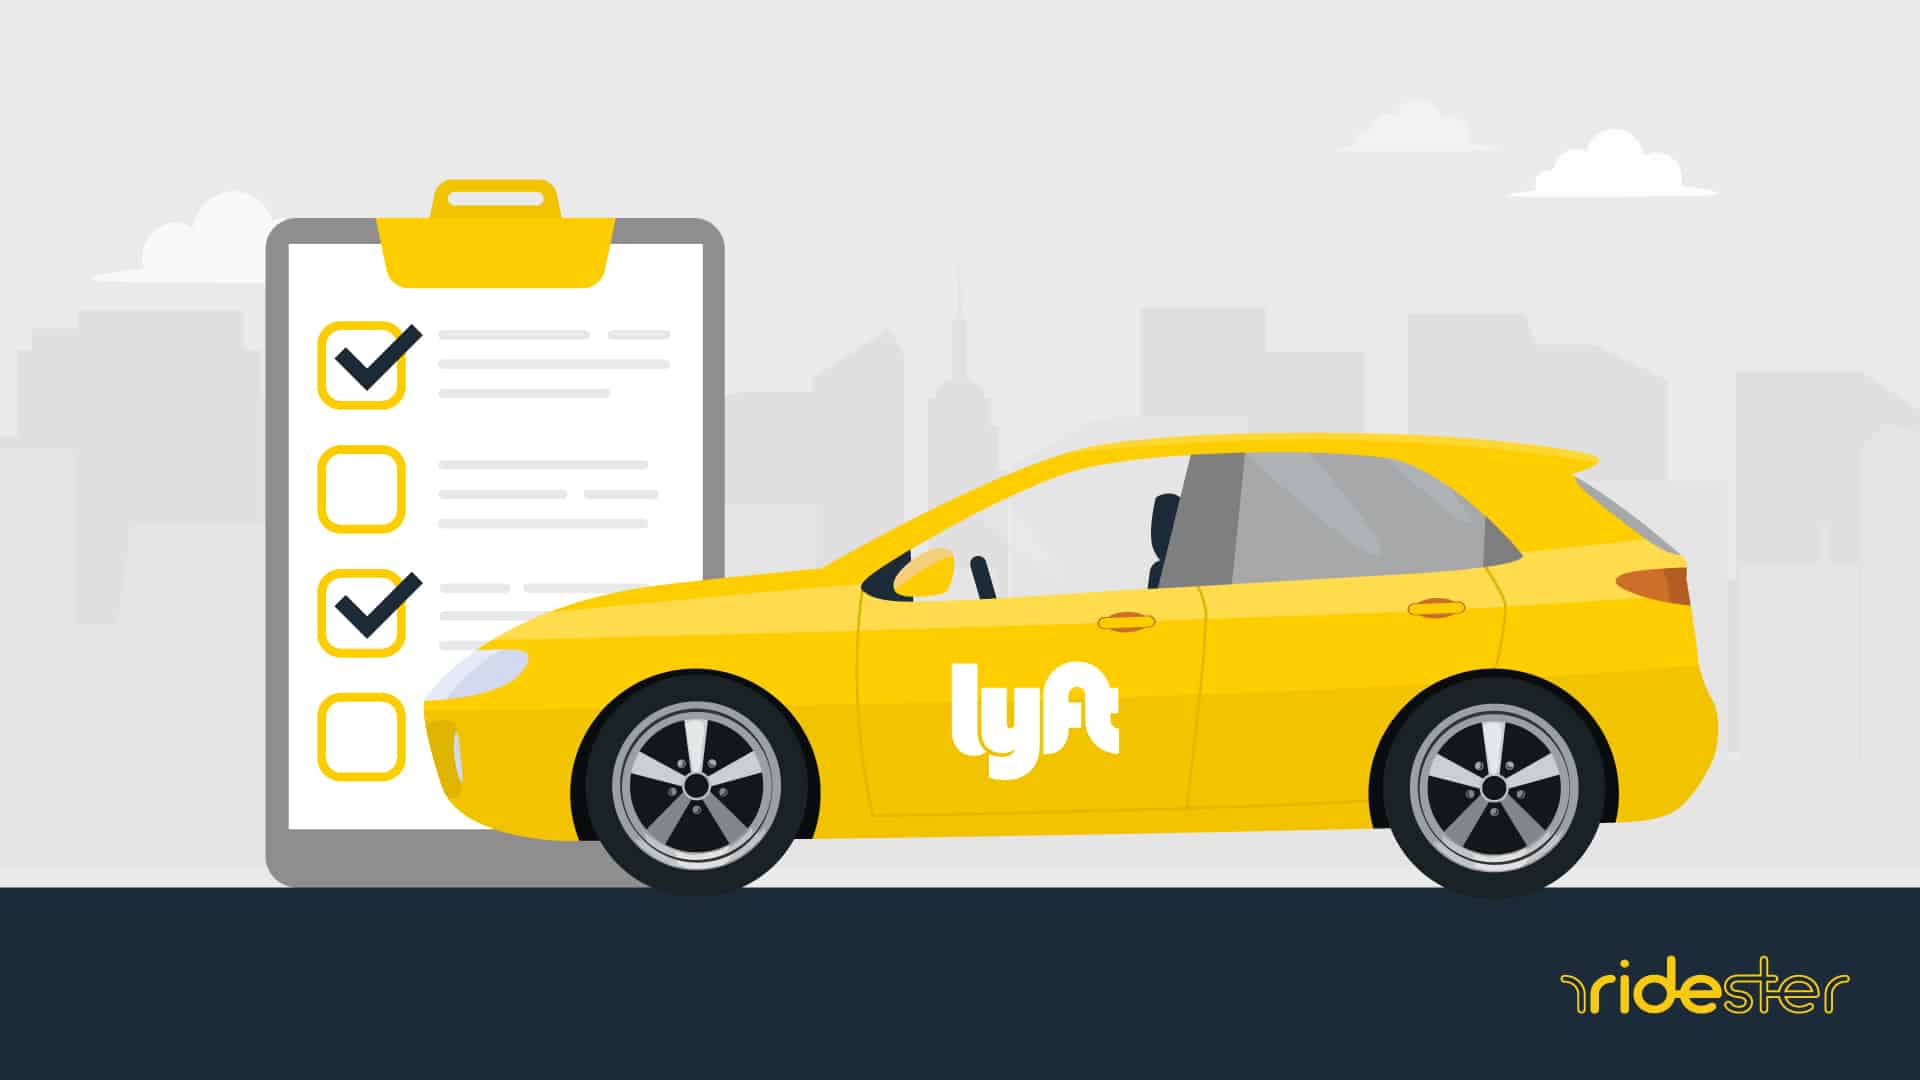 Lyft Car Requirements Every Applicant's Vehcile Must Meet